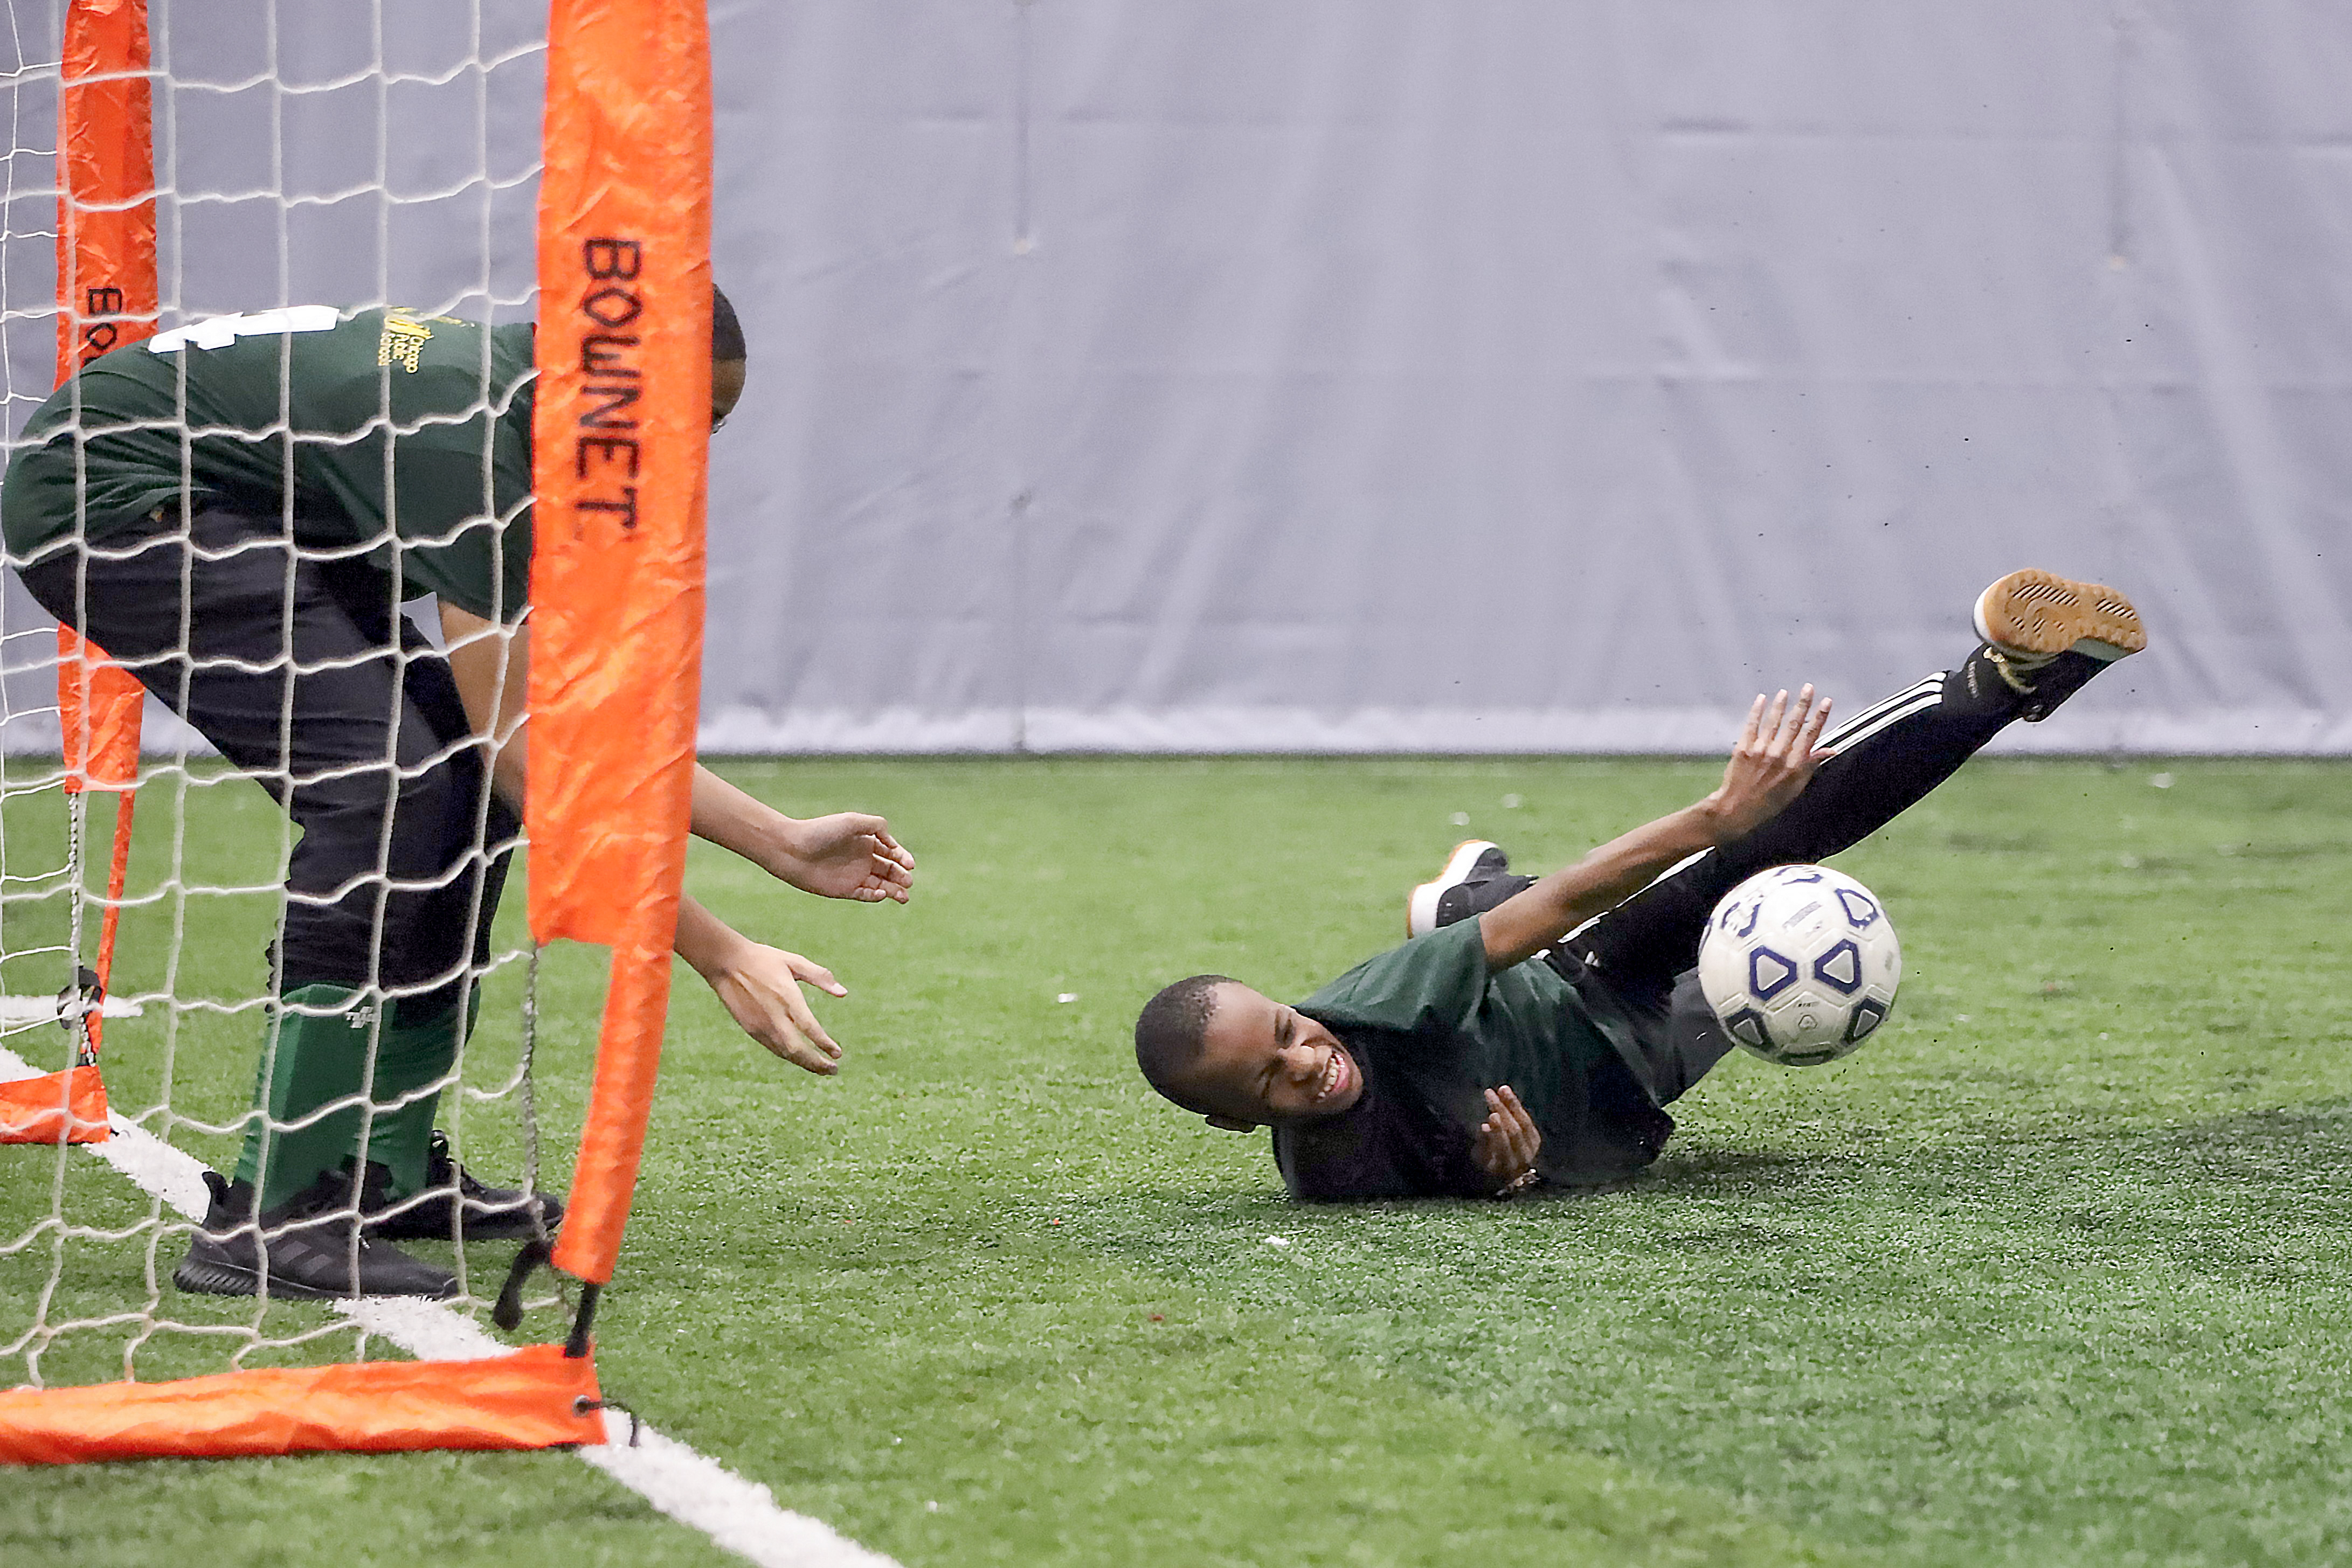 Kenneth dives towards the ball in trying to help his goalie, Kristian